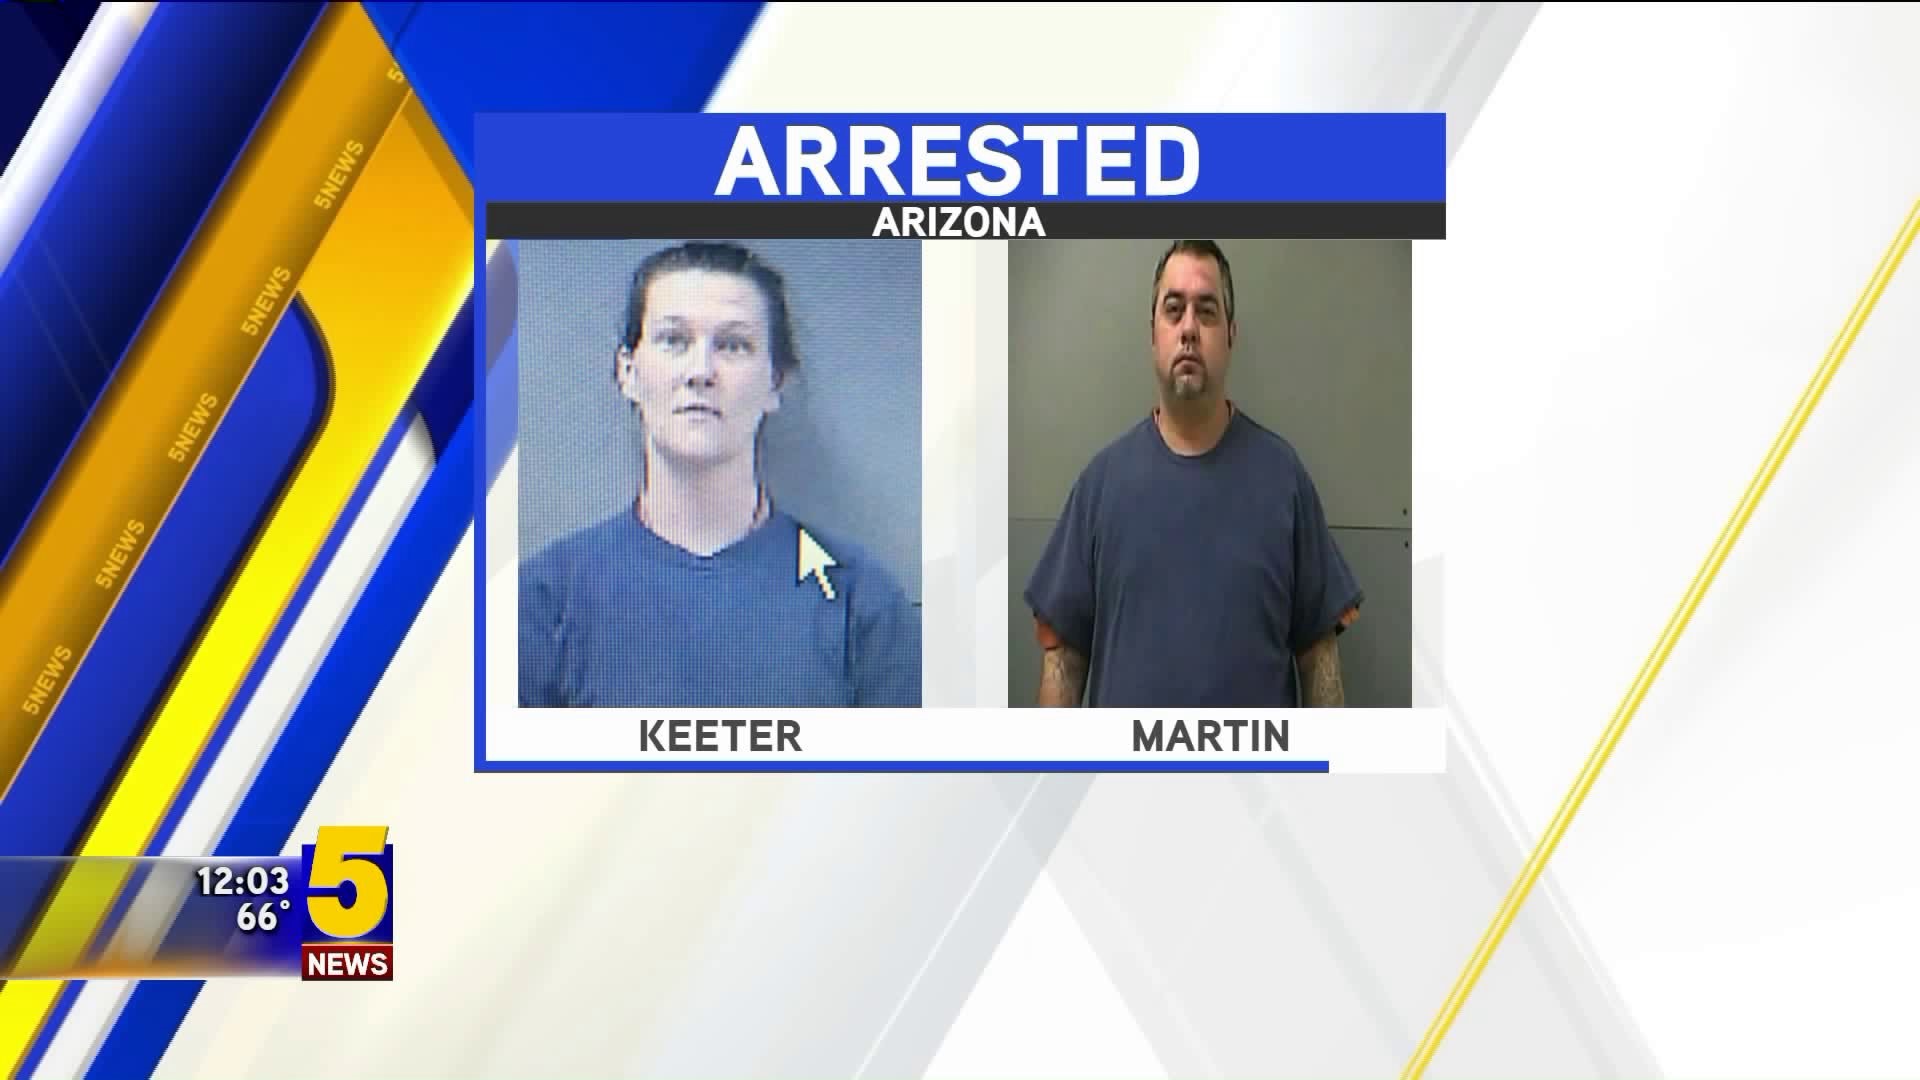 Arizona Wanted Suspects Arrested